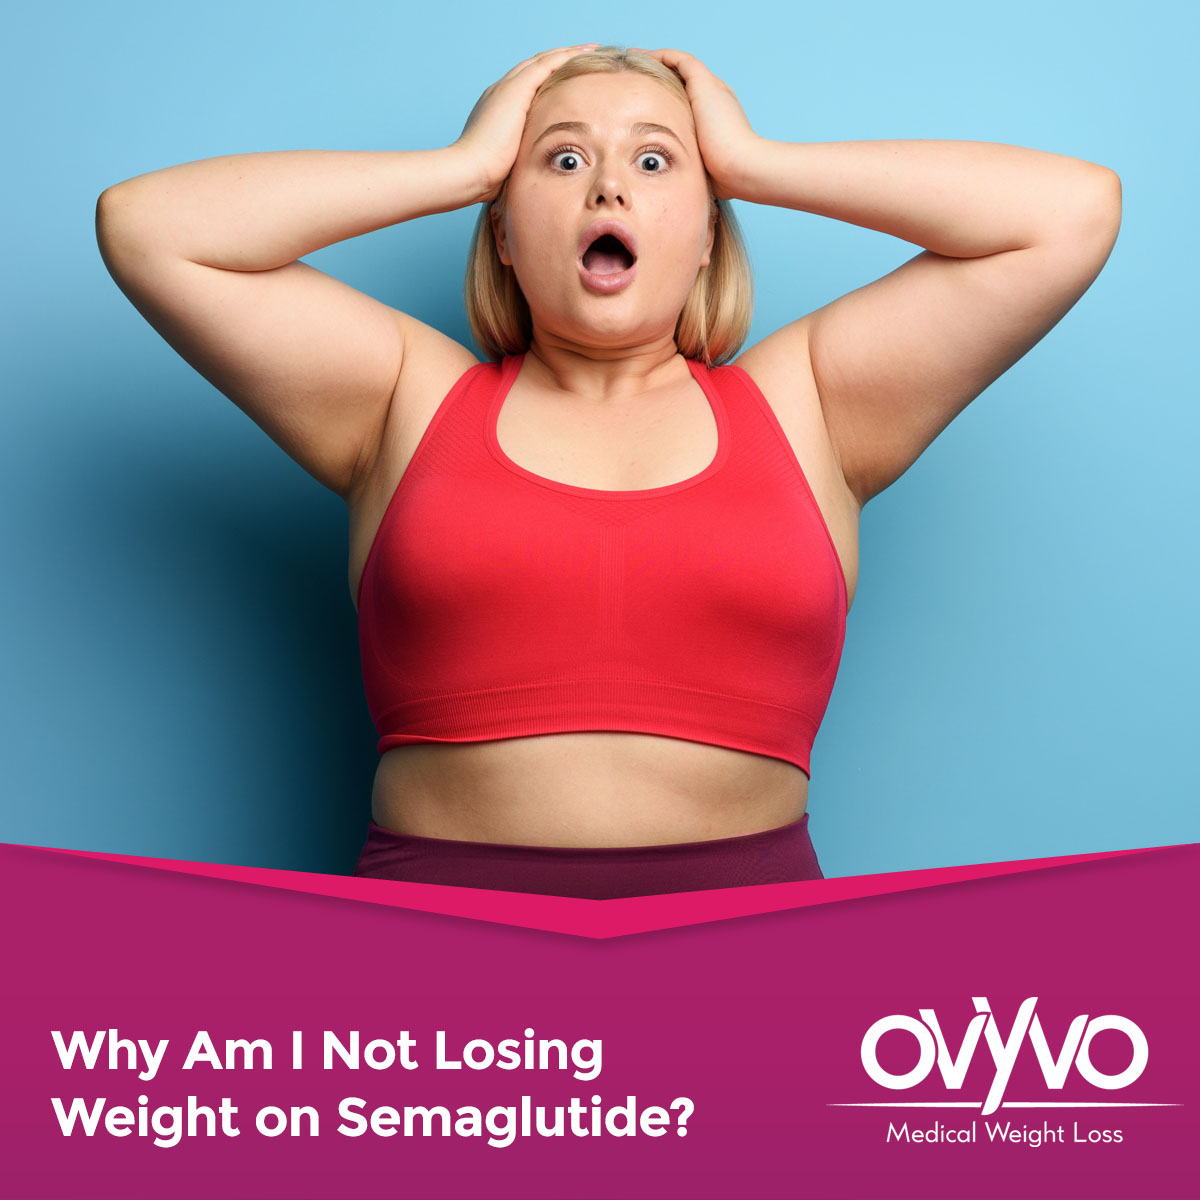 Why Am I Not Losing Weight on Semaglutide?